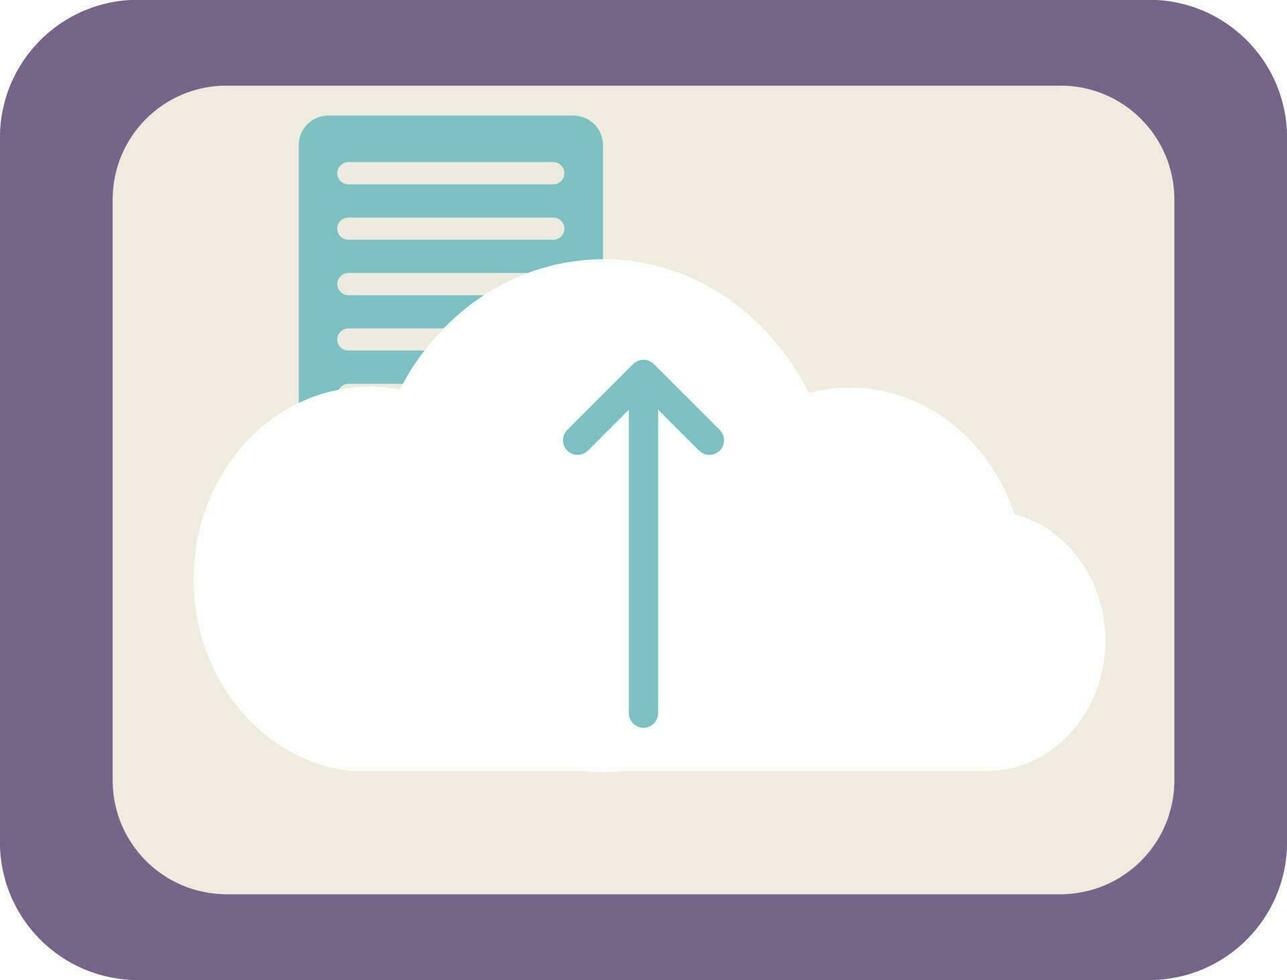 Cloud File Upload Tricolor Icon In Flat Style. vector